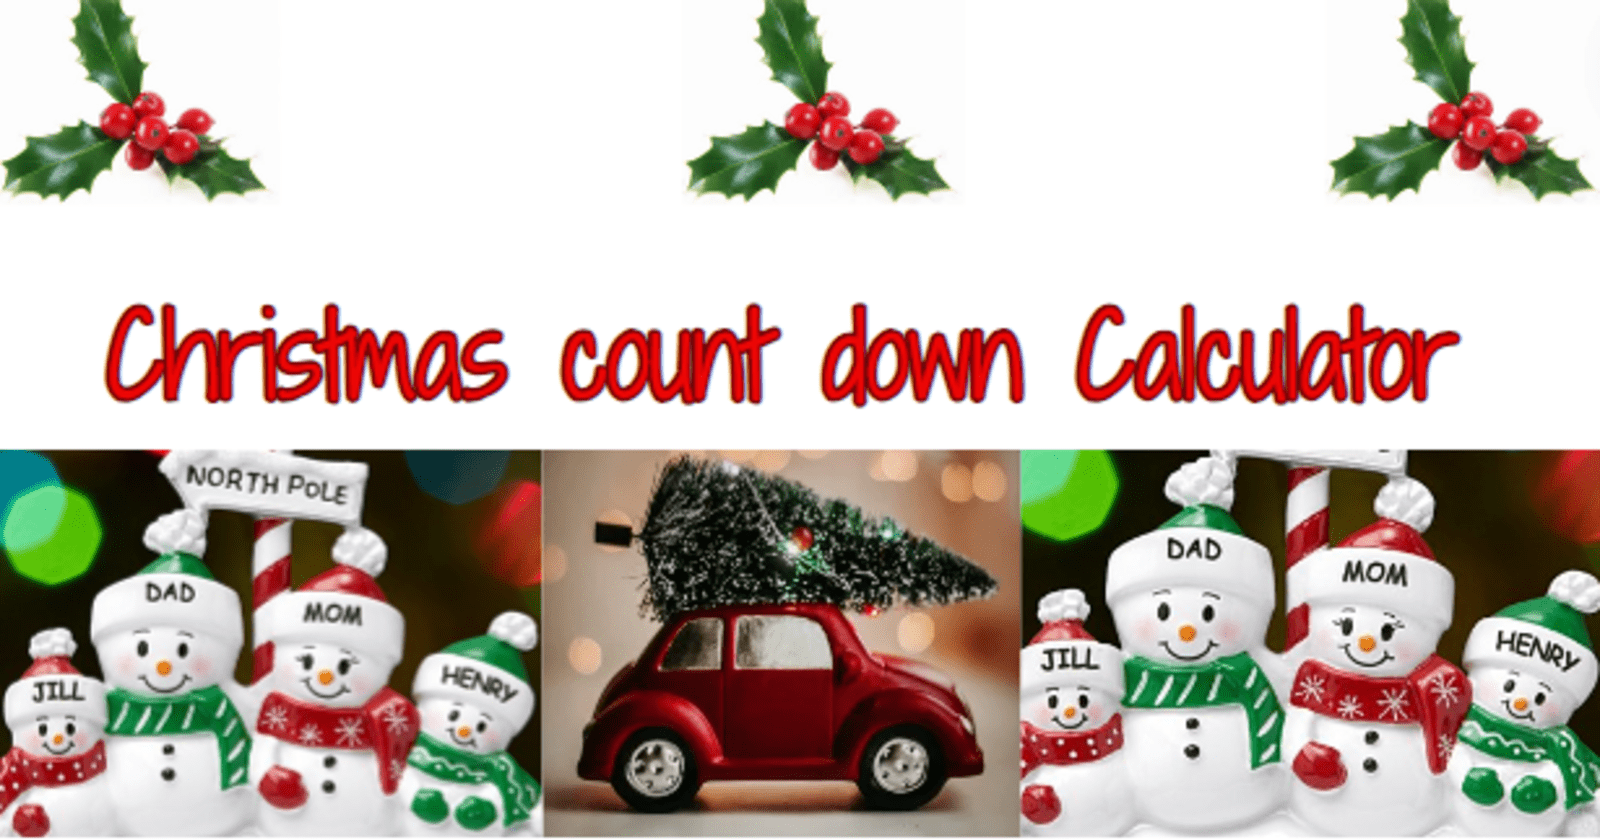 How Many Weeks Before Christmas: count down calculator, activites planner